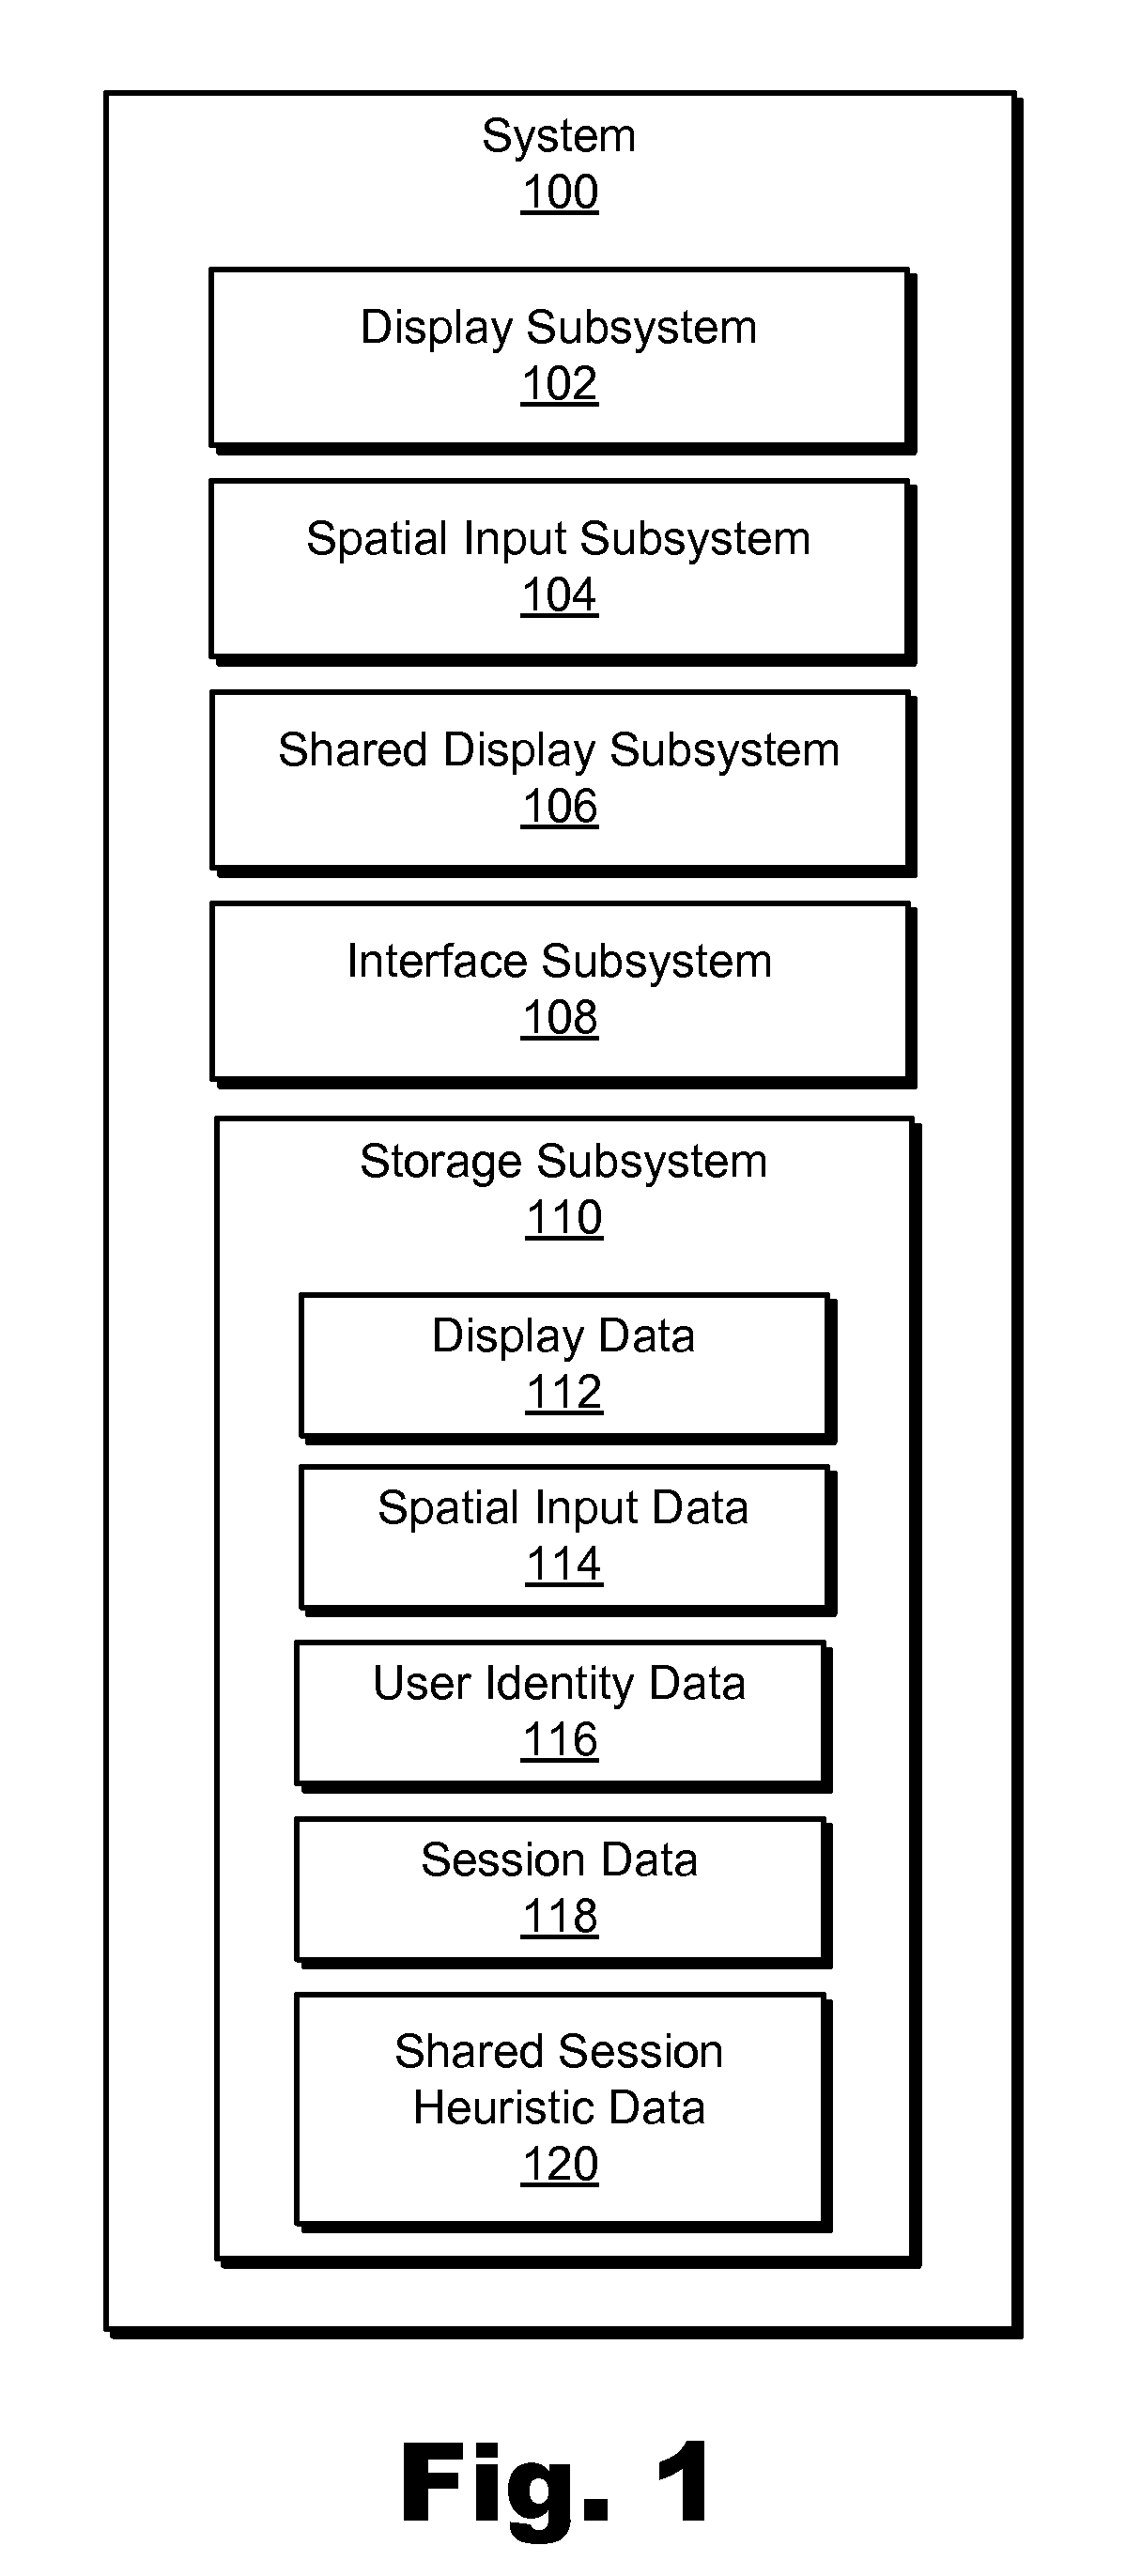 Systems and methods for providing a spatial-input-based multi-user shared display experience